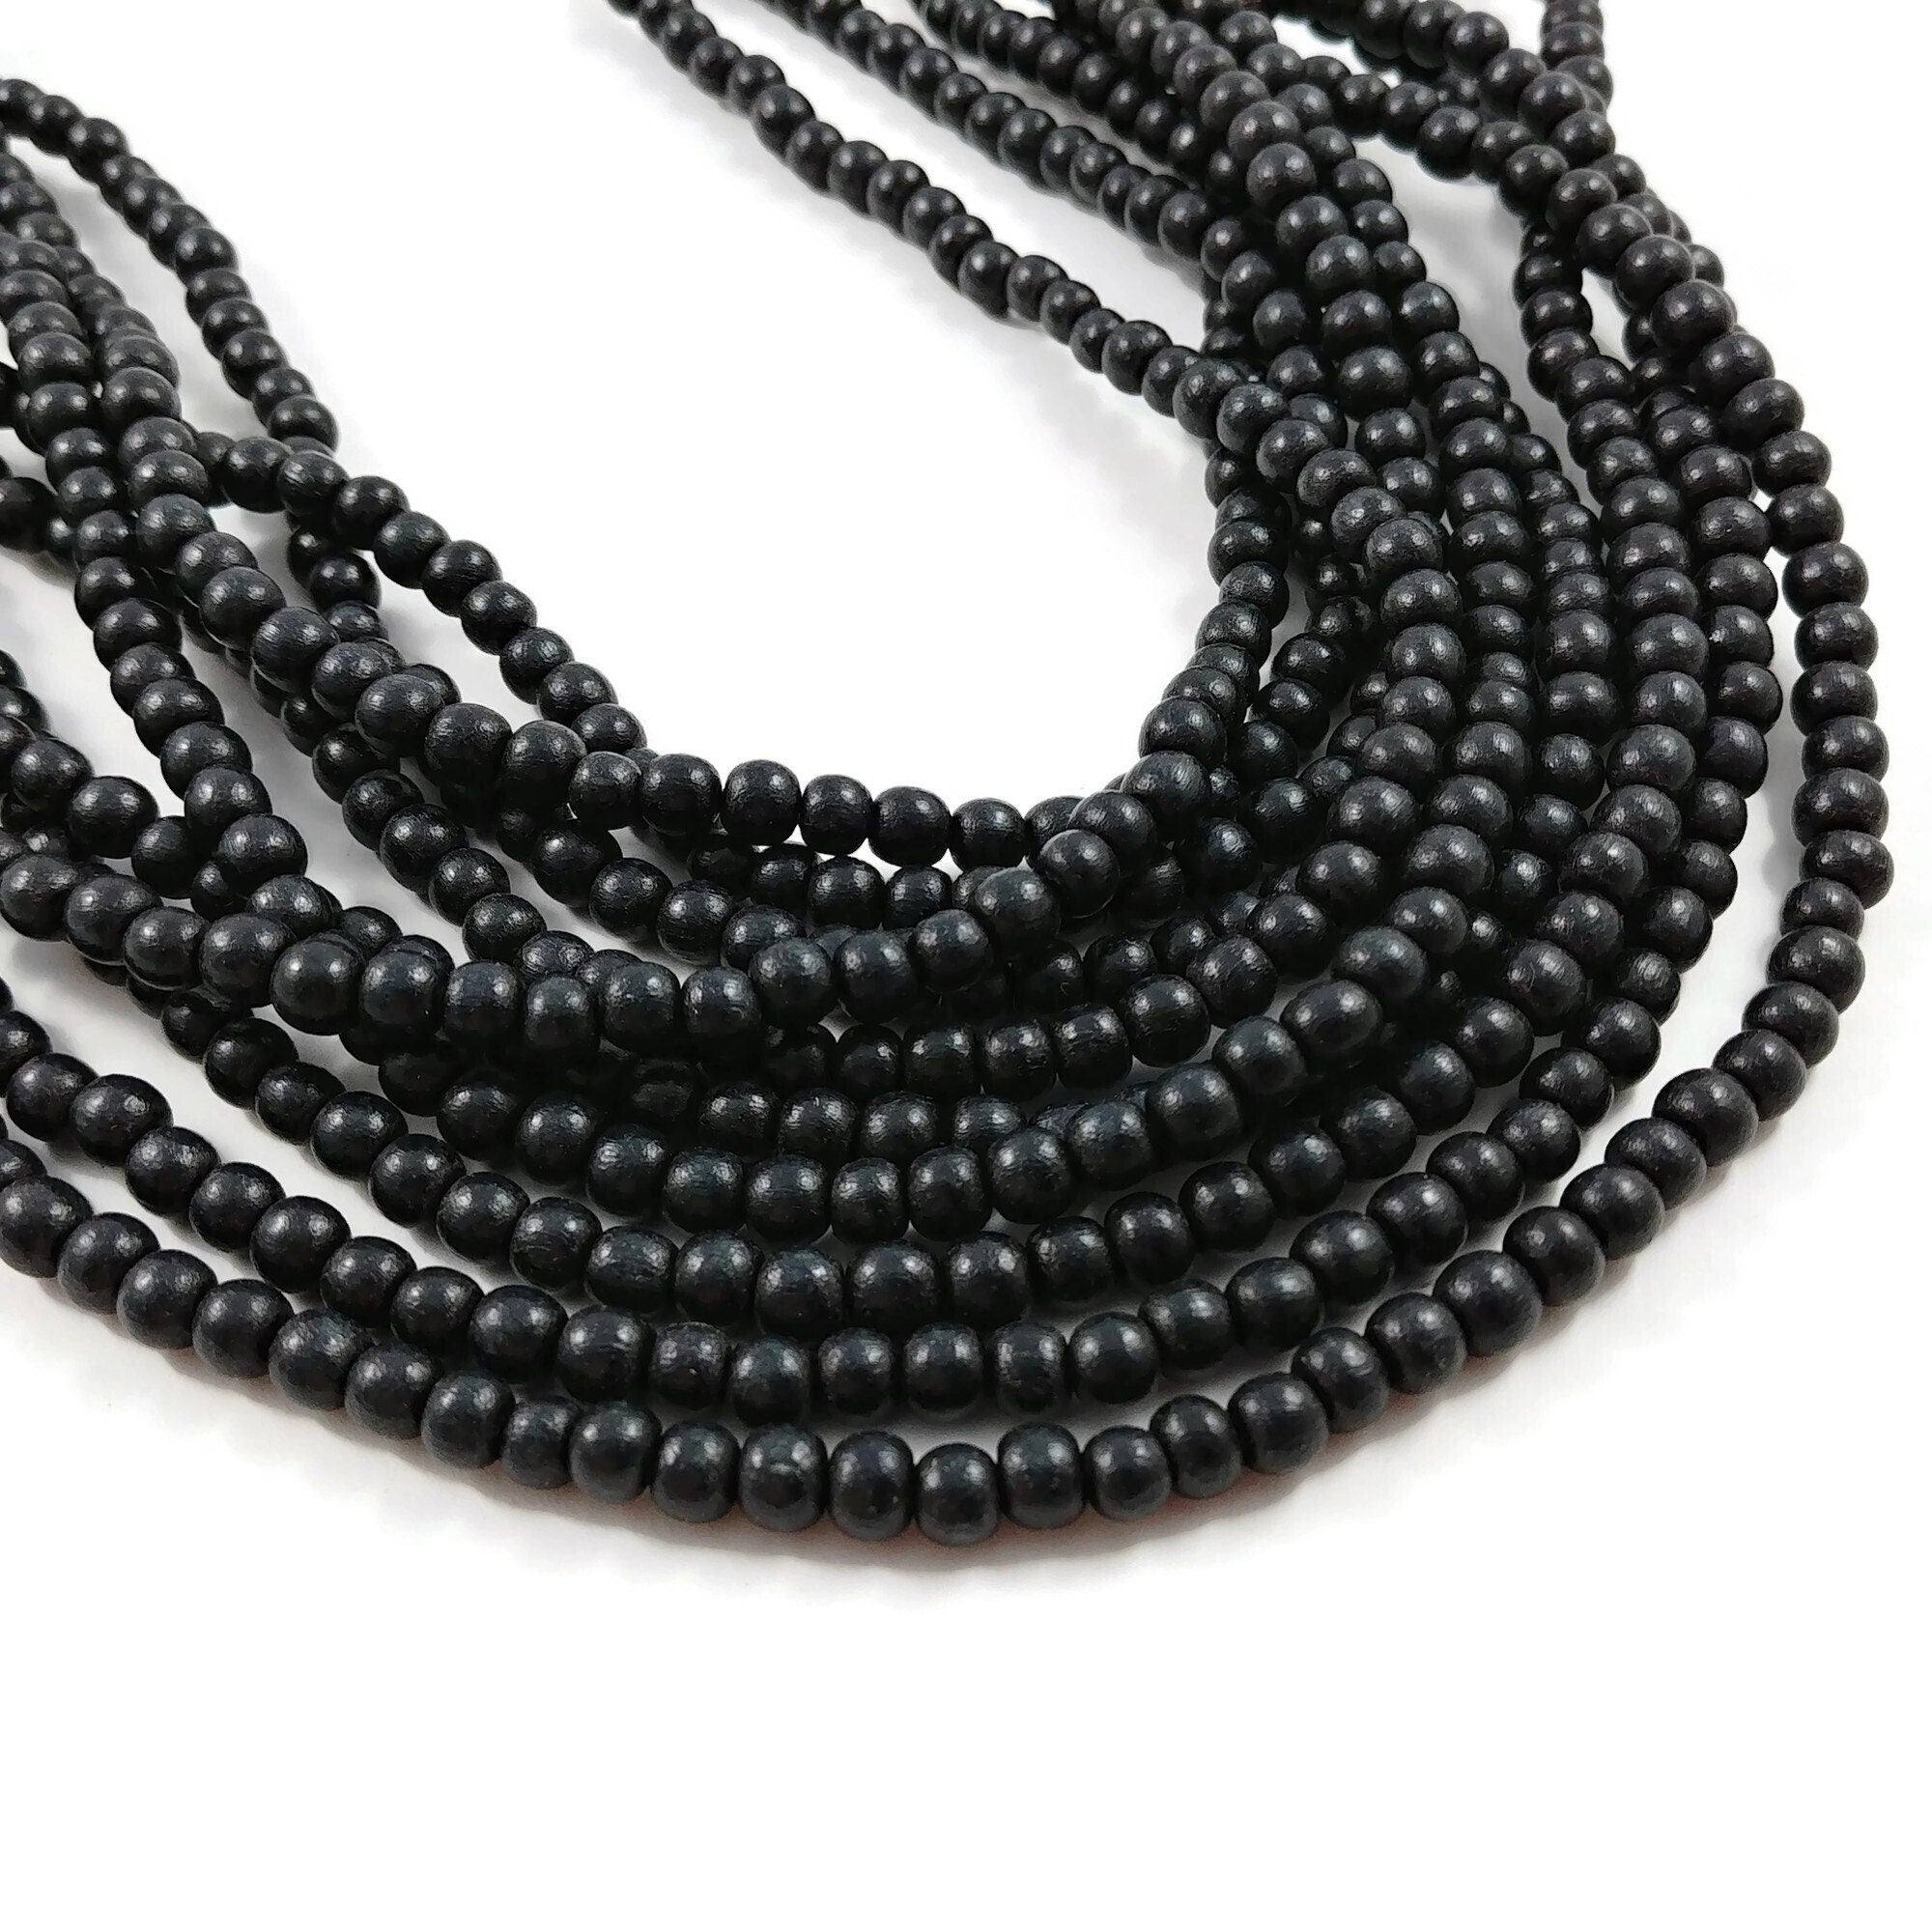 1000 Black 4mm Round Wood Seed Beads~Wooden Beads - AliExpress